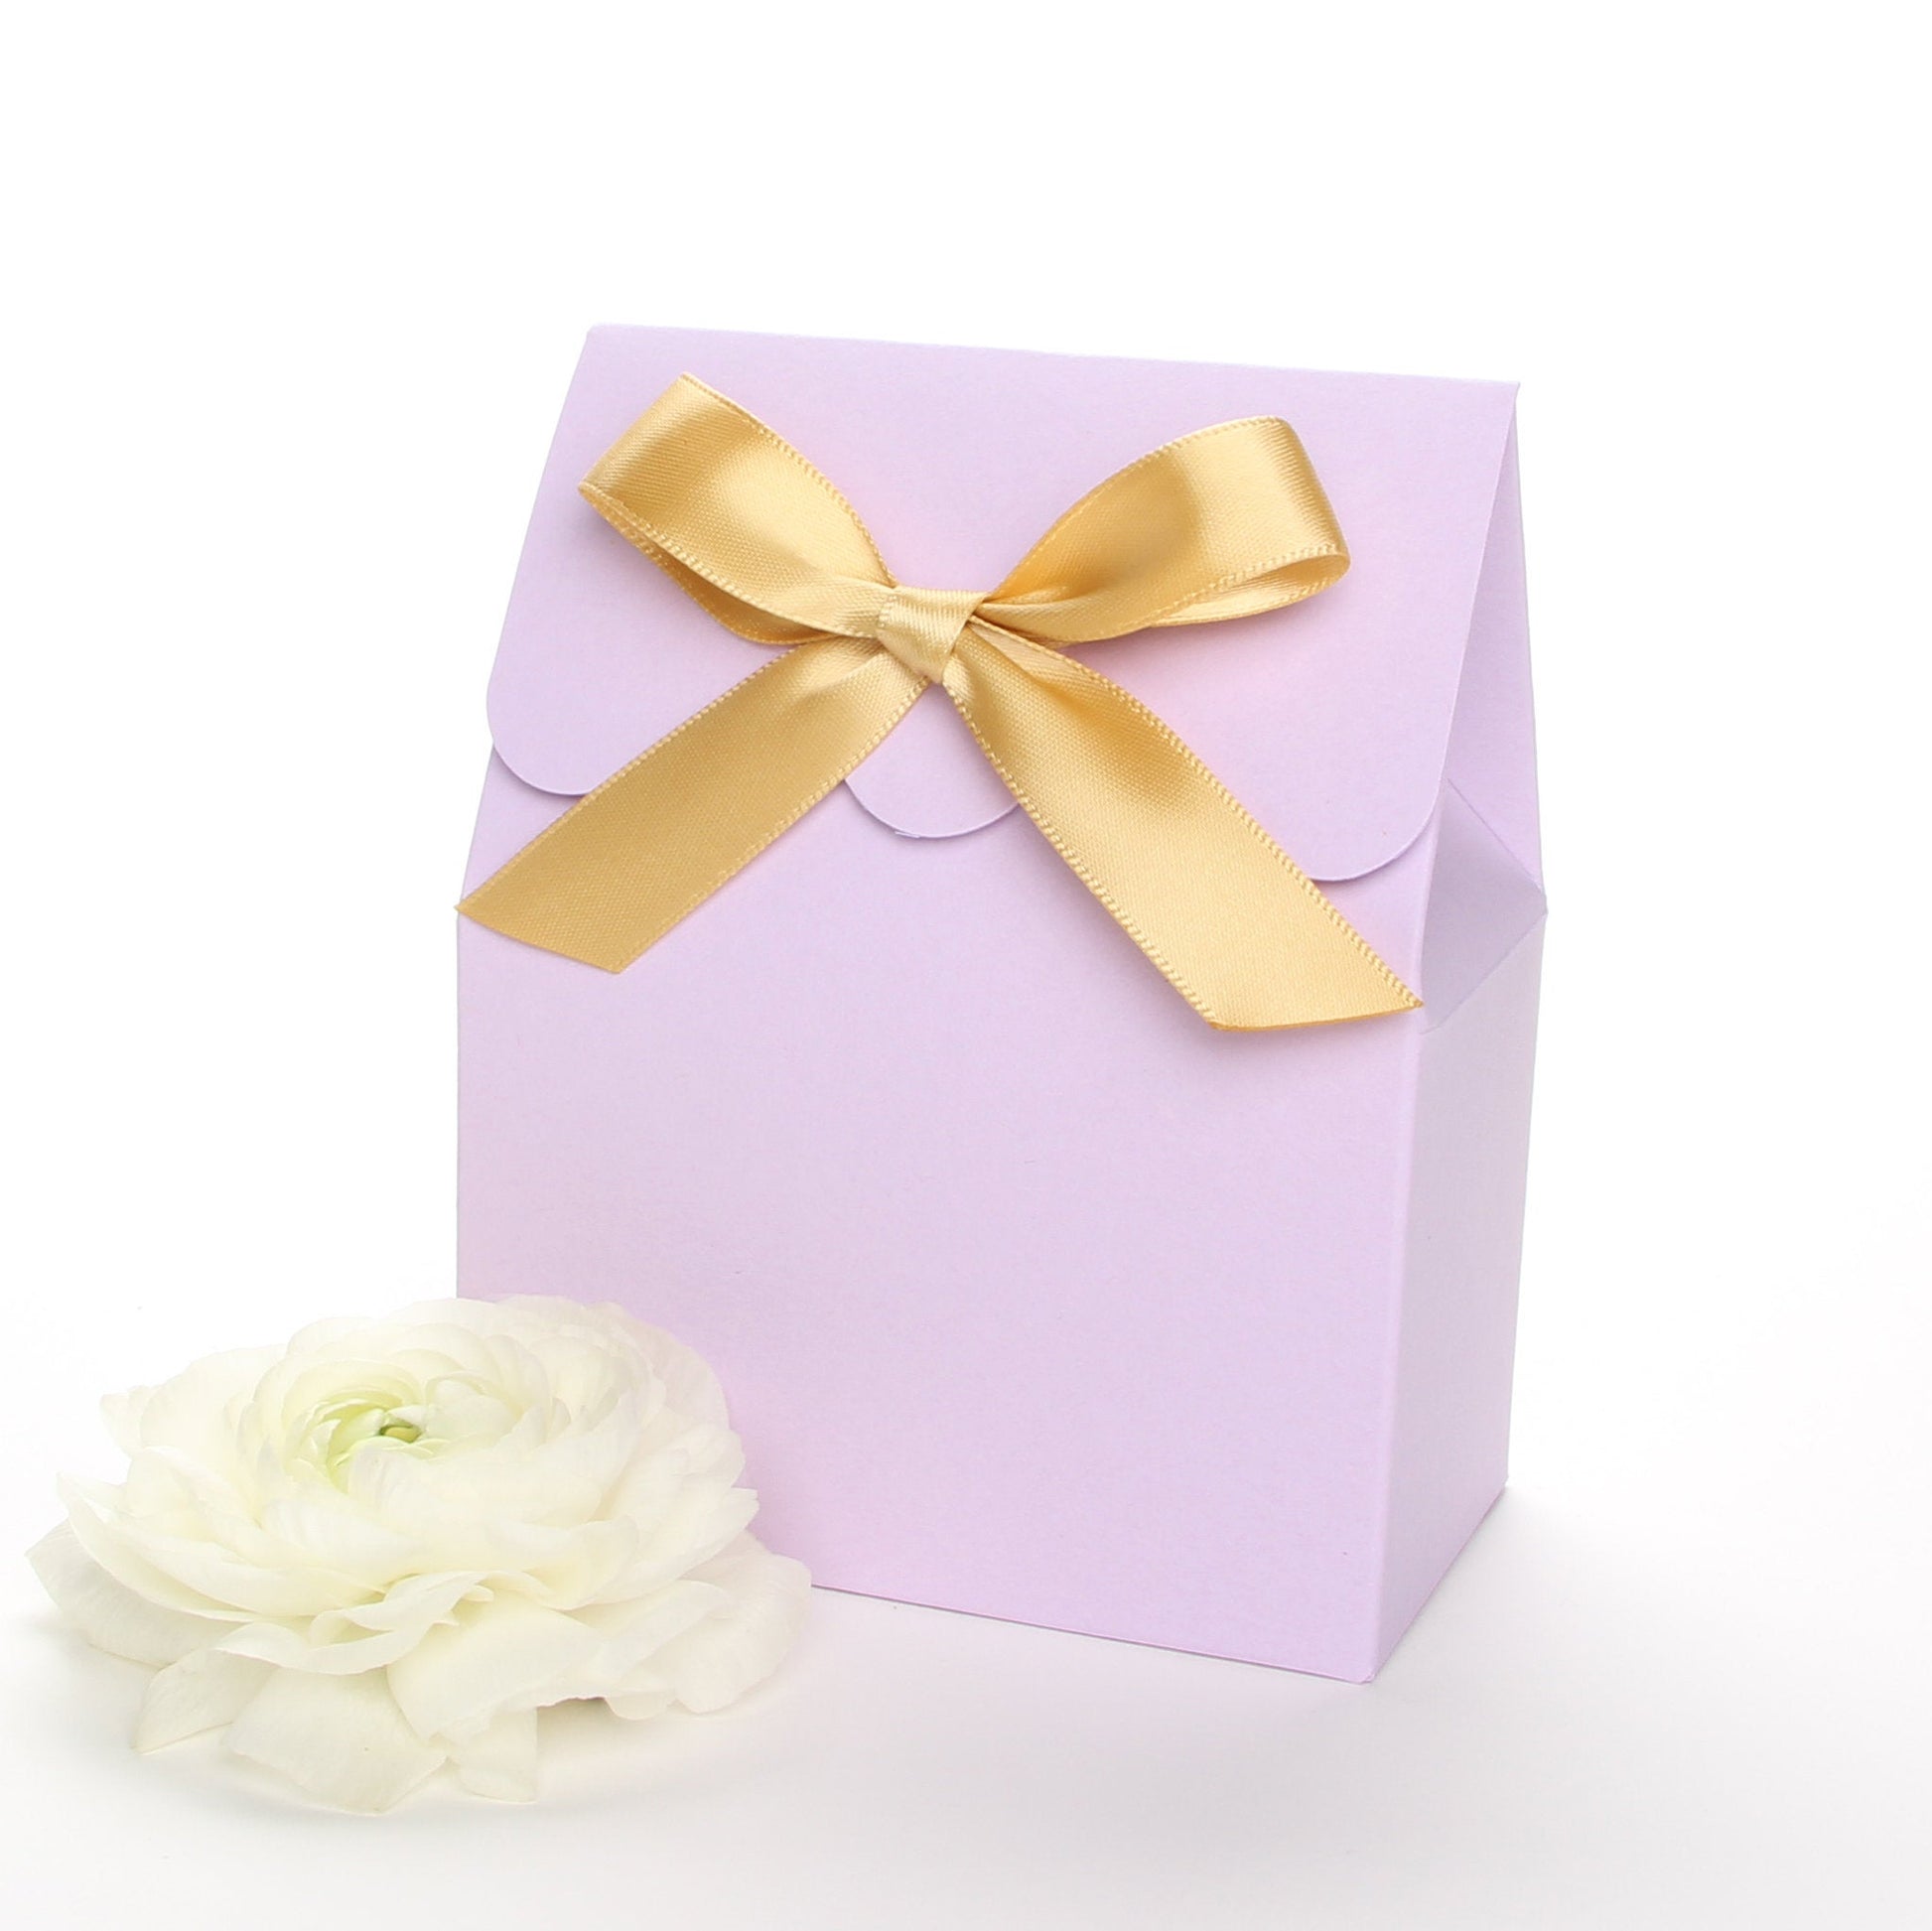 Lux Party’s lavender favor box with a scalloped edge and a gold satin bow next to white ranunculus flowers.